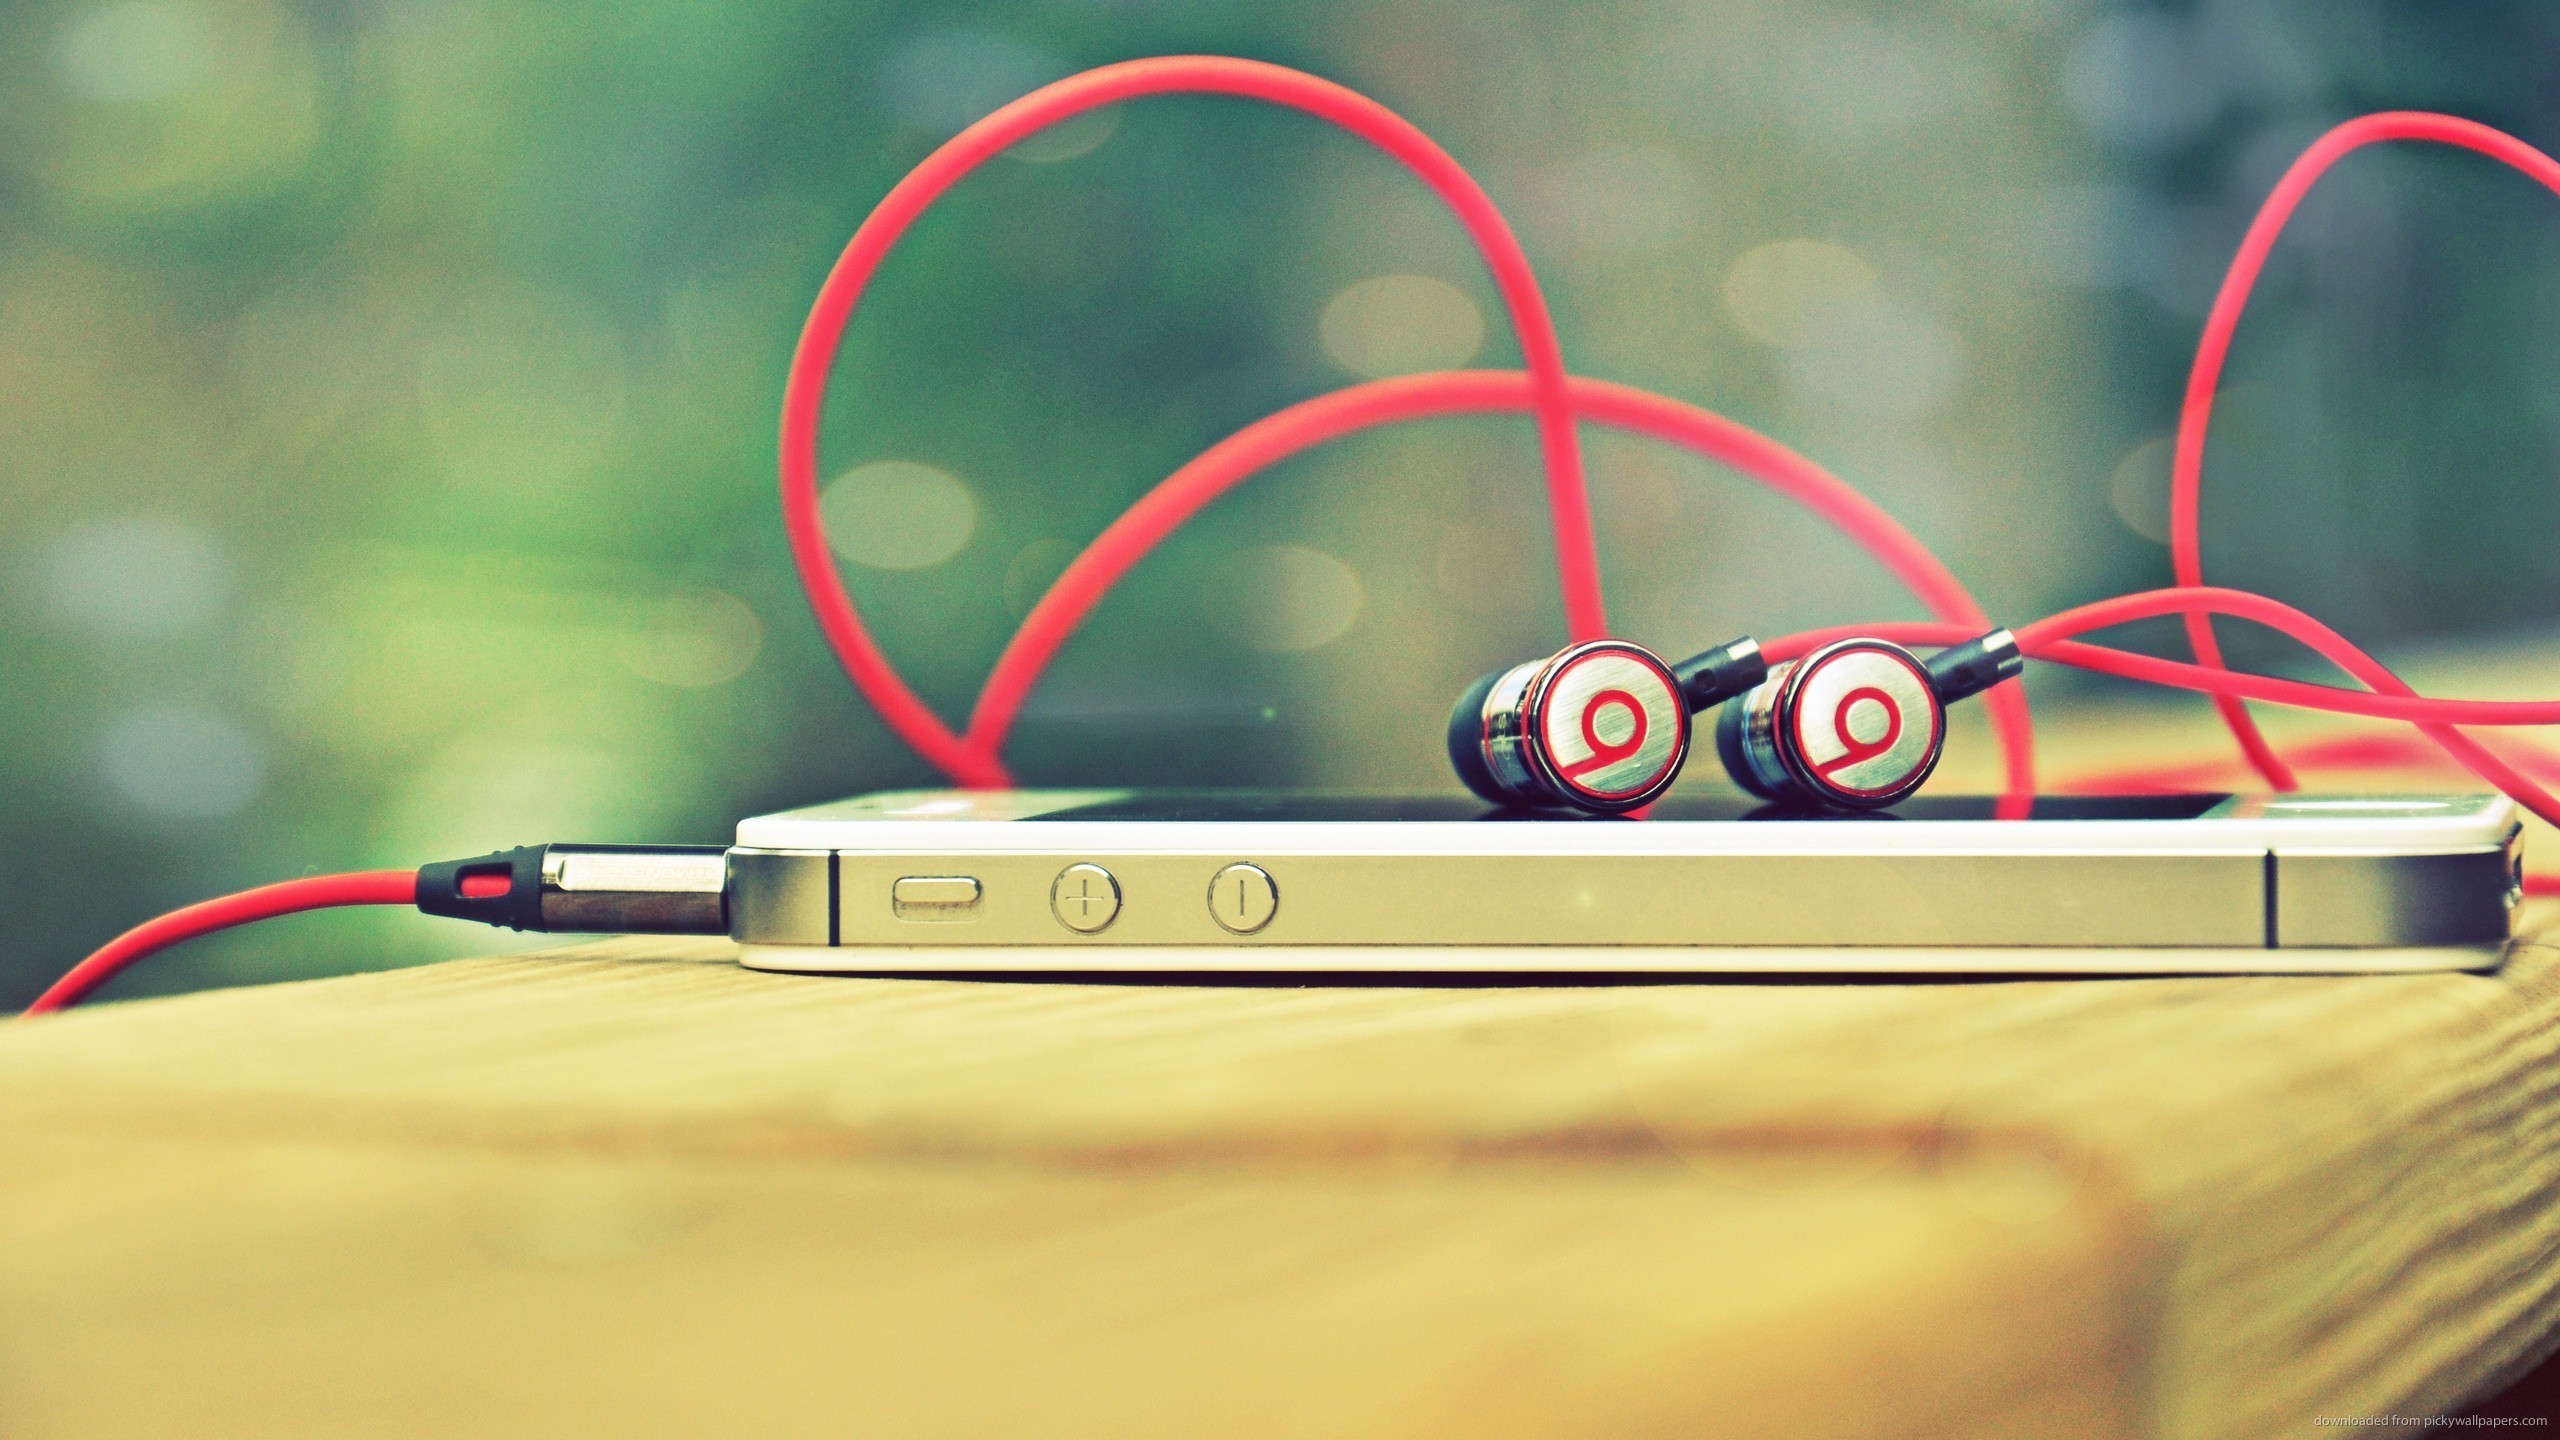 2560x1440 Iphone with Beats By Dr. Dre for 